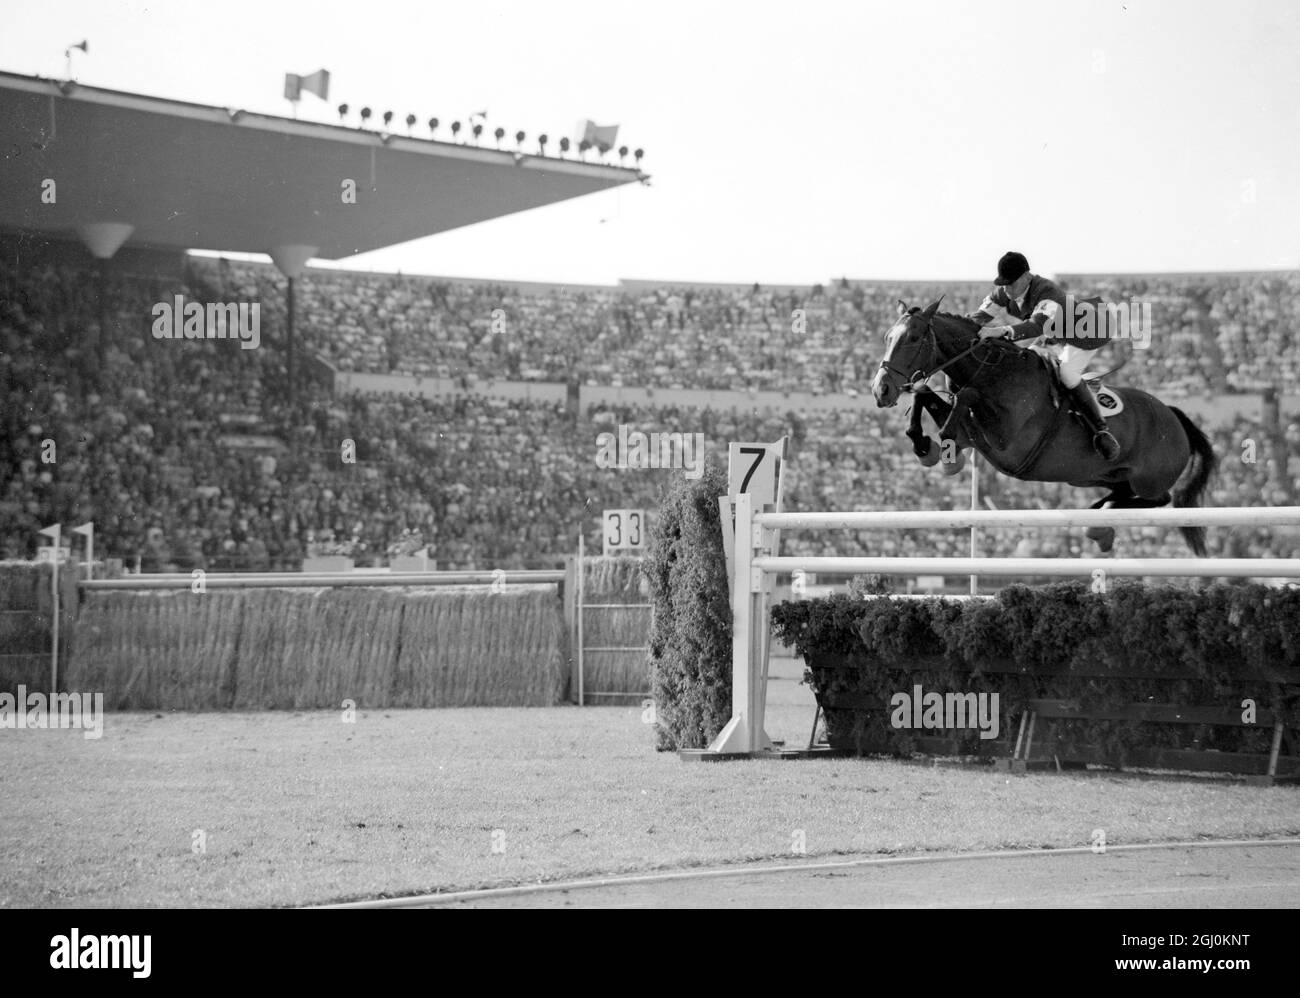 Helsinki: W.H. White (Britain) riding Nizefella, during the Prix Des Nations jumping event. here. The Individual event was won by a Frenchman, P. Jonqueres D' Oriola, and Britain took first place in the team event. 4 August 1952 Stock Photo